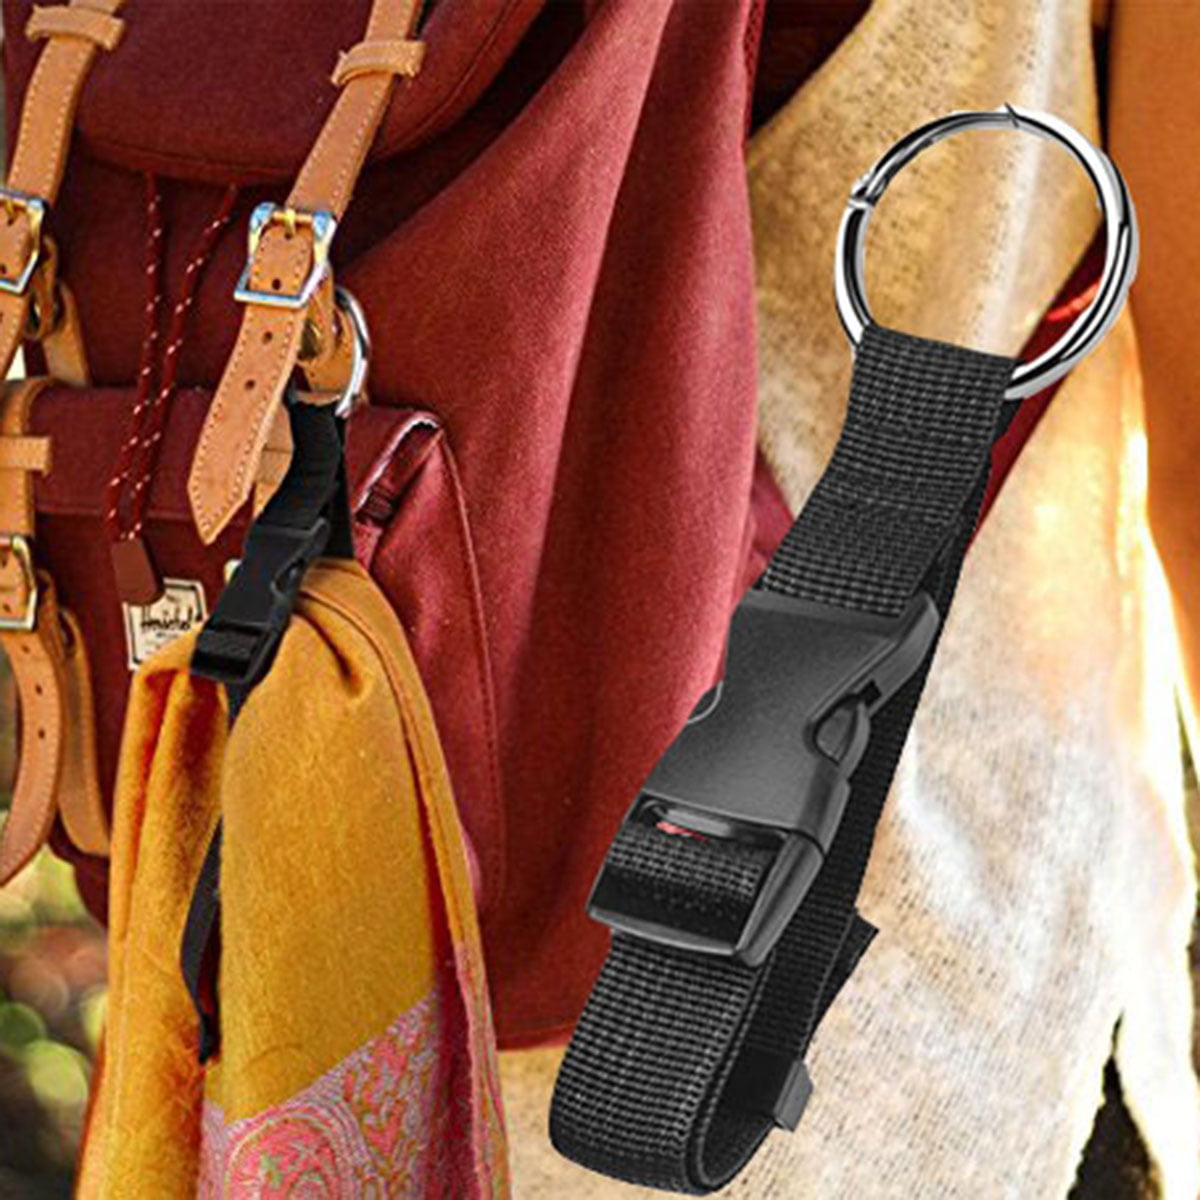 Add a Bag Luggage Strap Jacket Holder Gripper Wisdompro Heavy Duty Baggage Suitcase Straps Nylon Belts with D-buckle Travel Accessories Black 